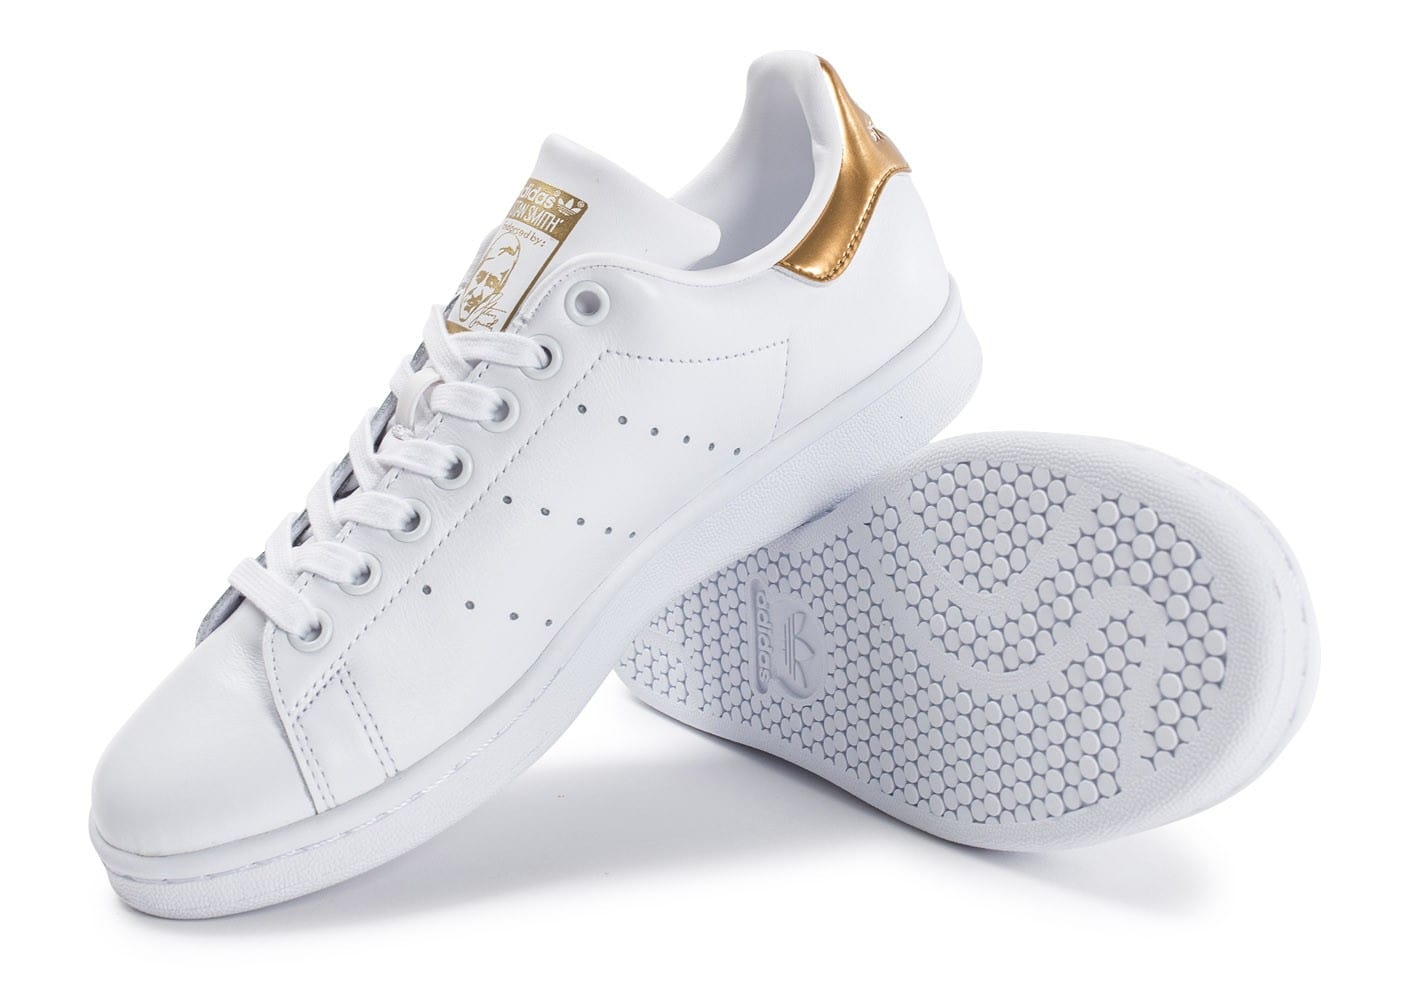 adidas blanche et or